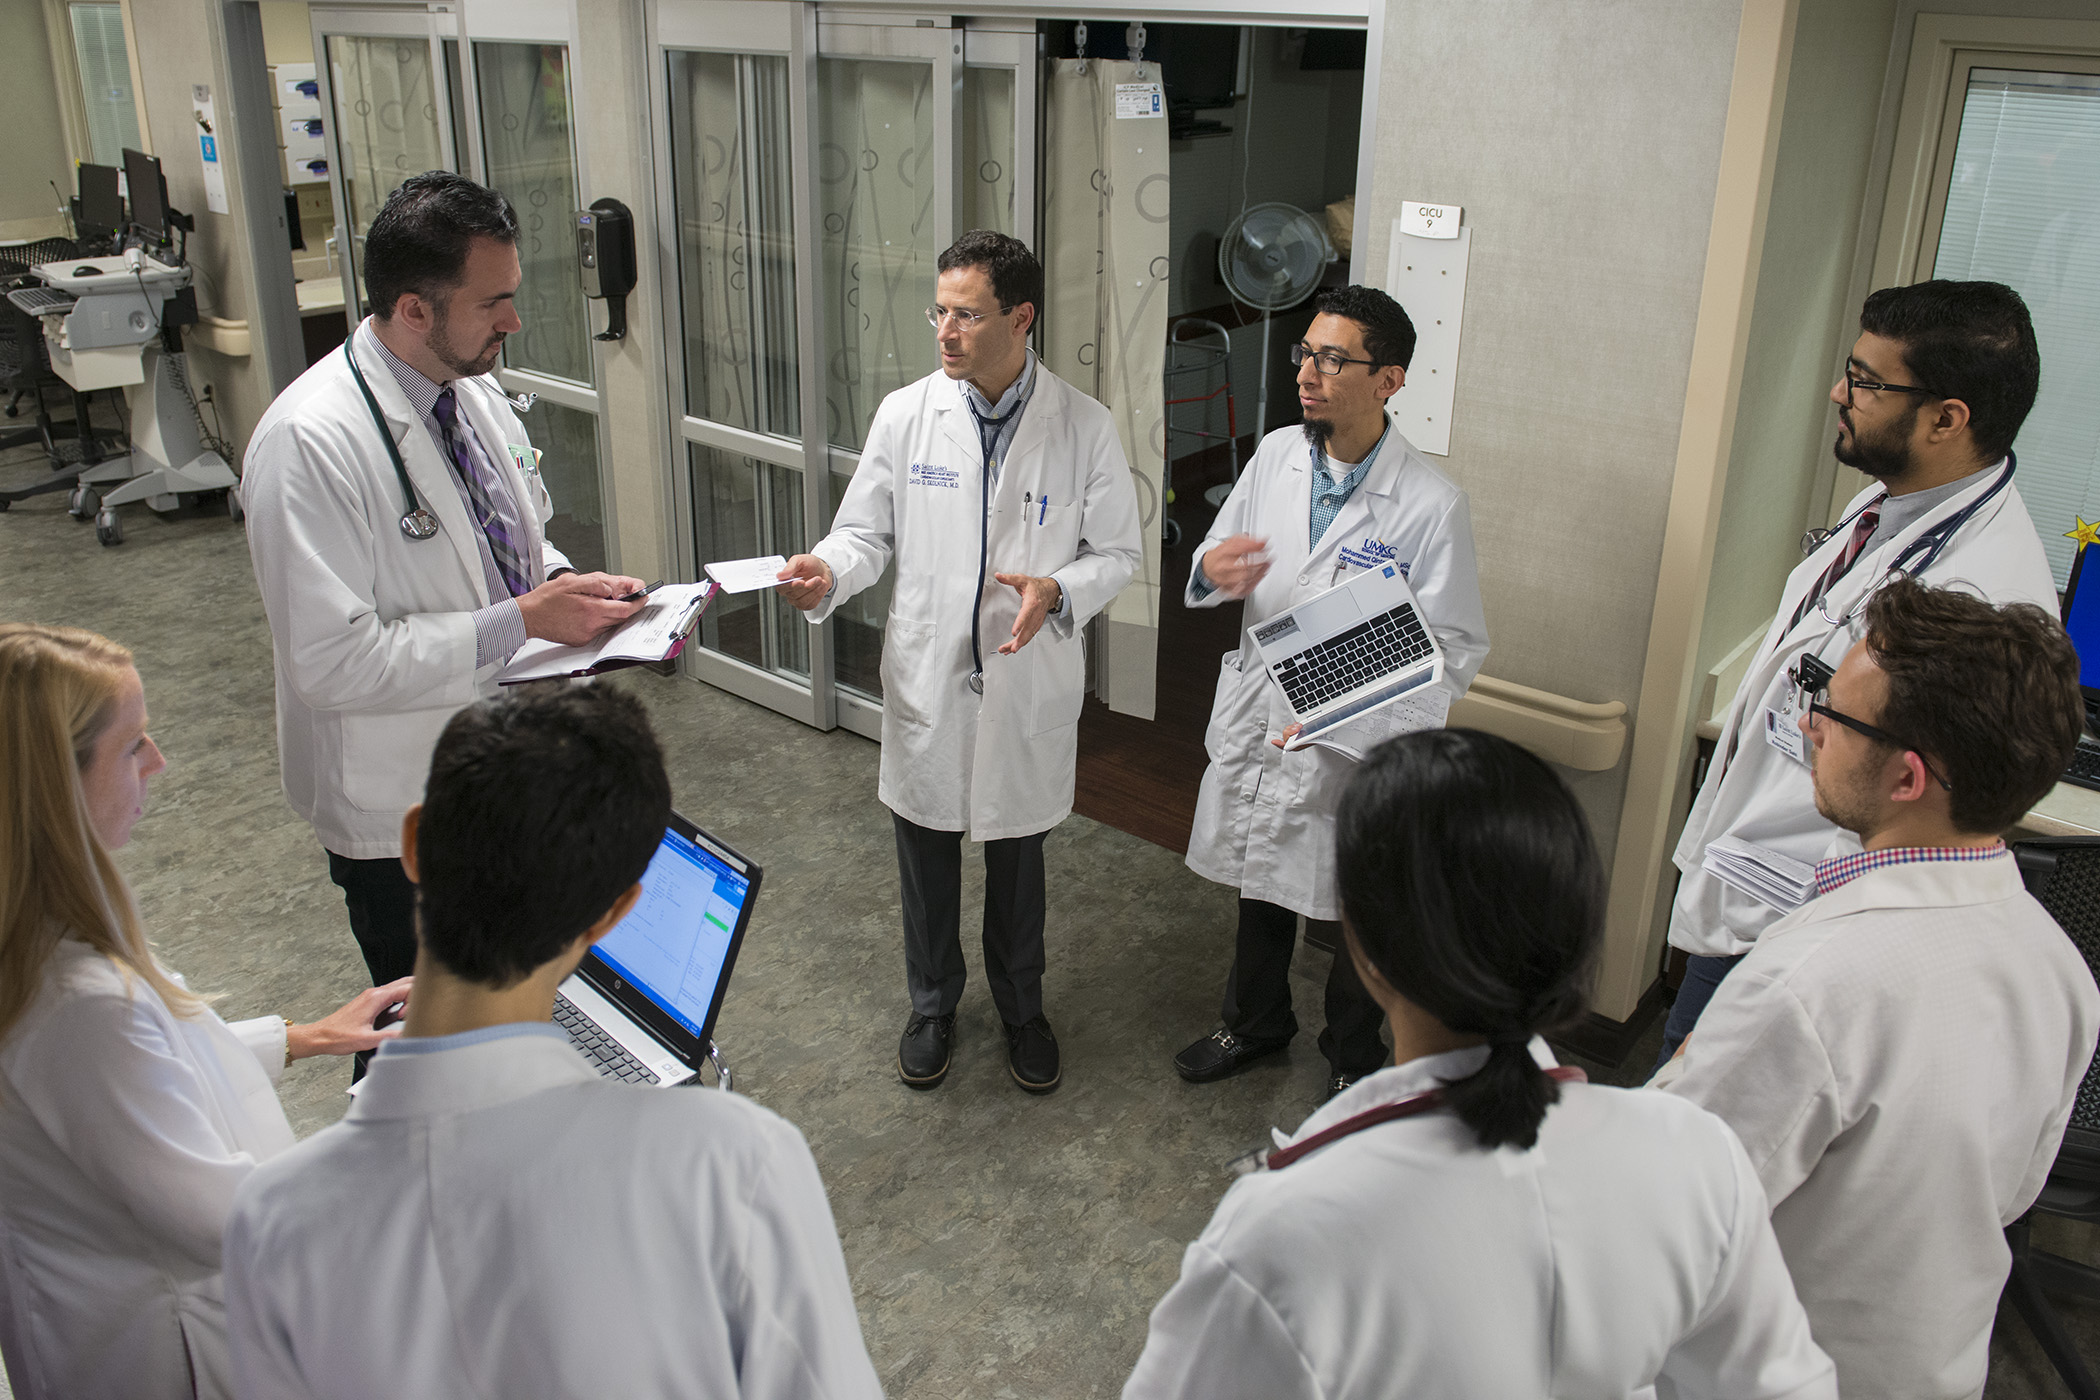 A group of cardiovascular disease fellows are shown in the CCU at Saint Luke's Hospital